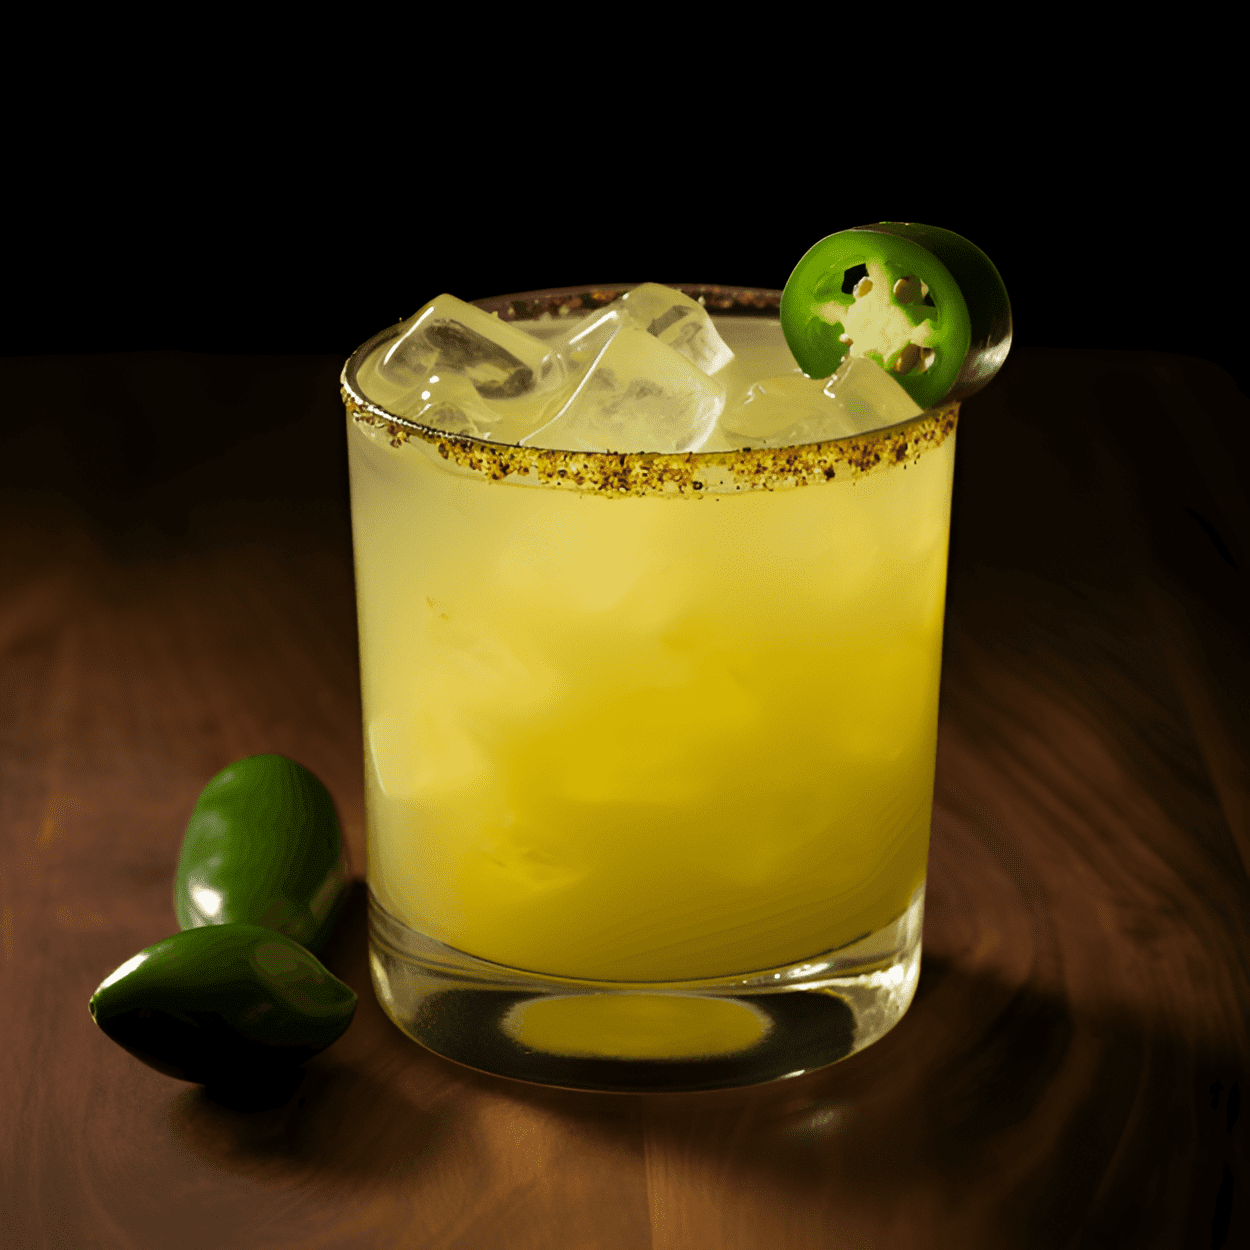 Hot Charlotte Cocktail Recipe - The Hot Charlotte is a delightful mix of sweet, sour, and spicy. The sweetness of the pineapple juice and simple syrup is perfectly balanced by the sourness of the lime juice, while the jalapeno adds a spicy kick that is sure to wake up your taste buds.